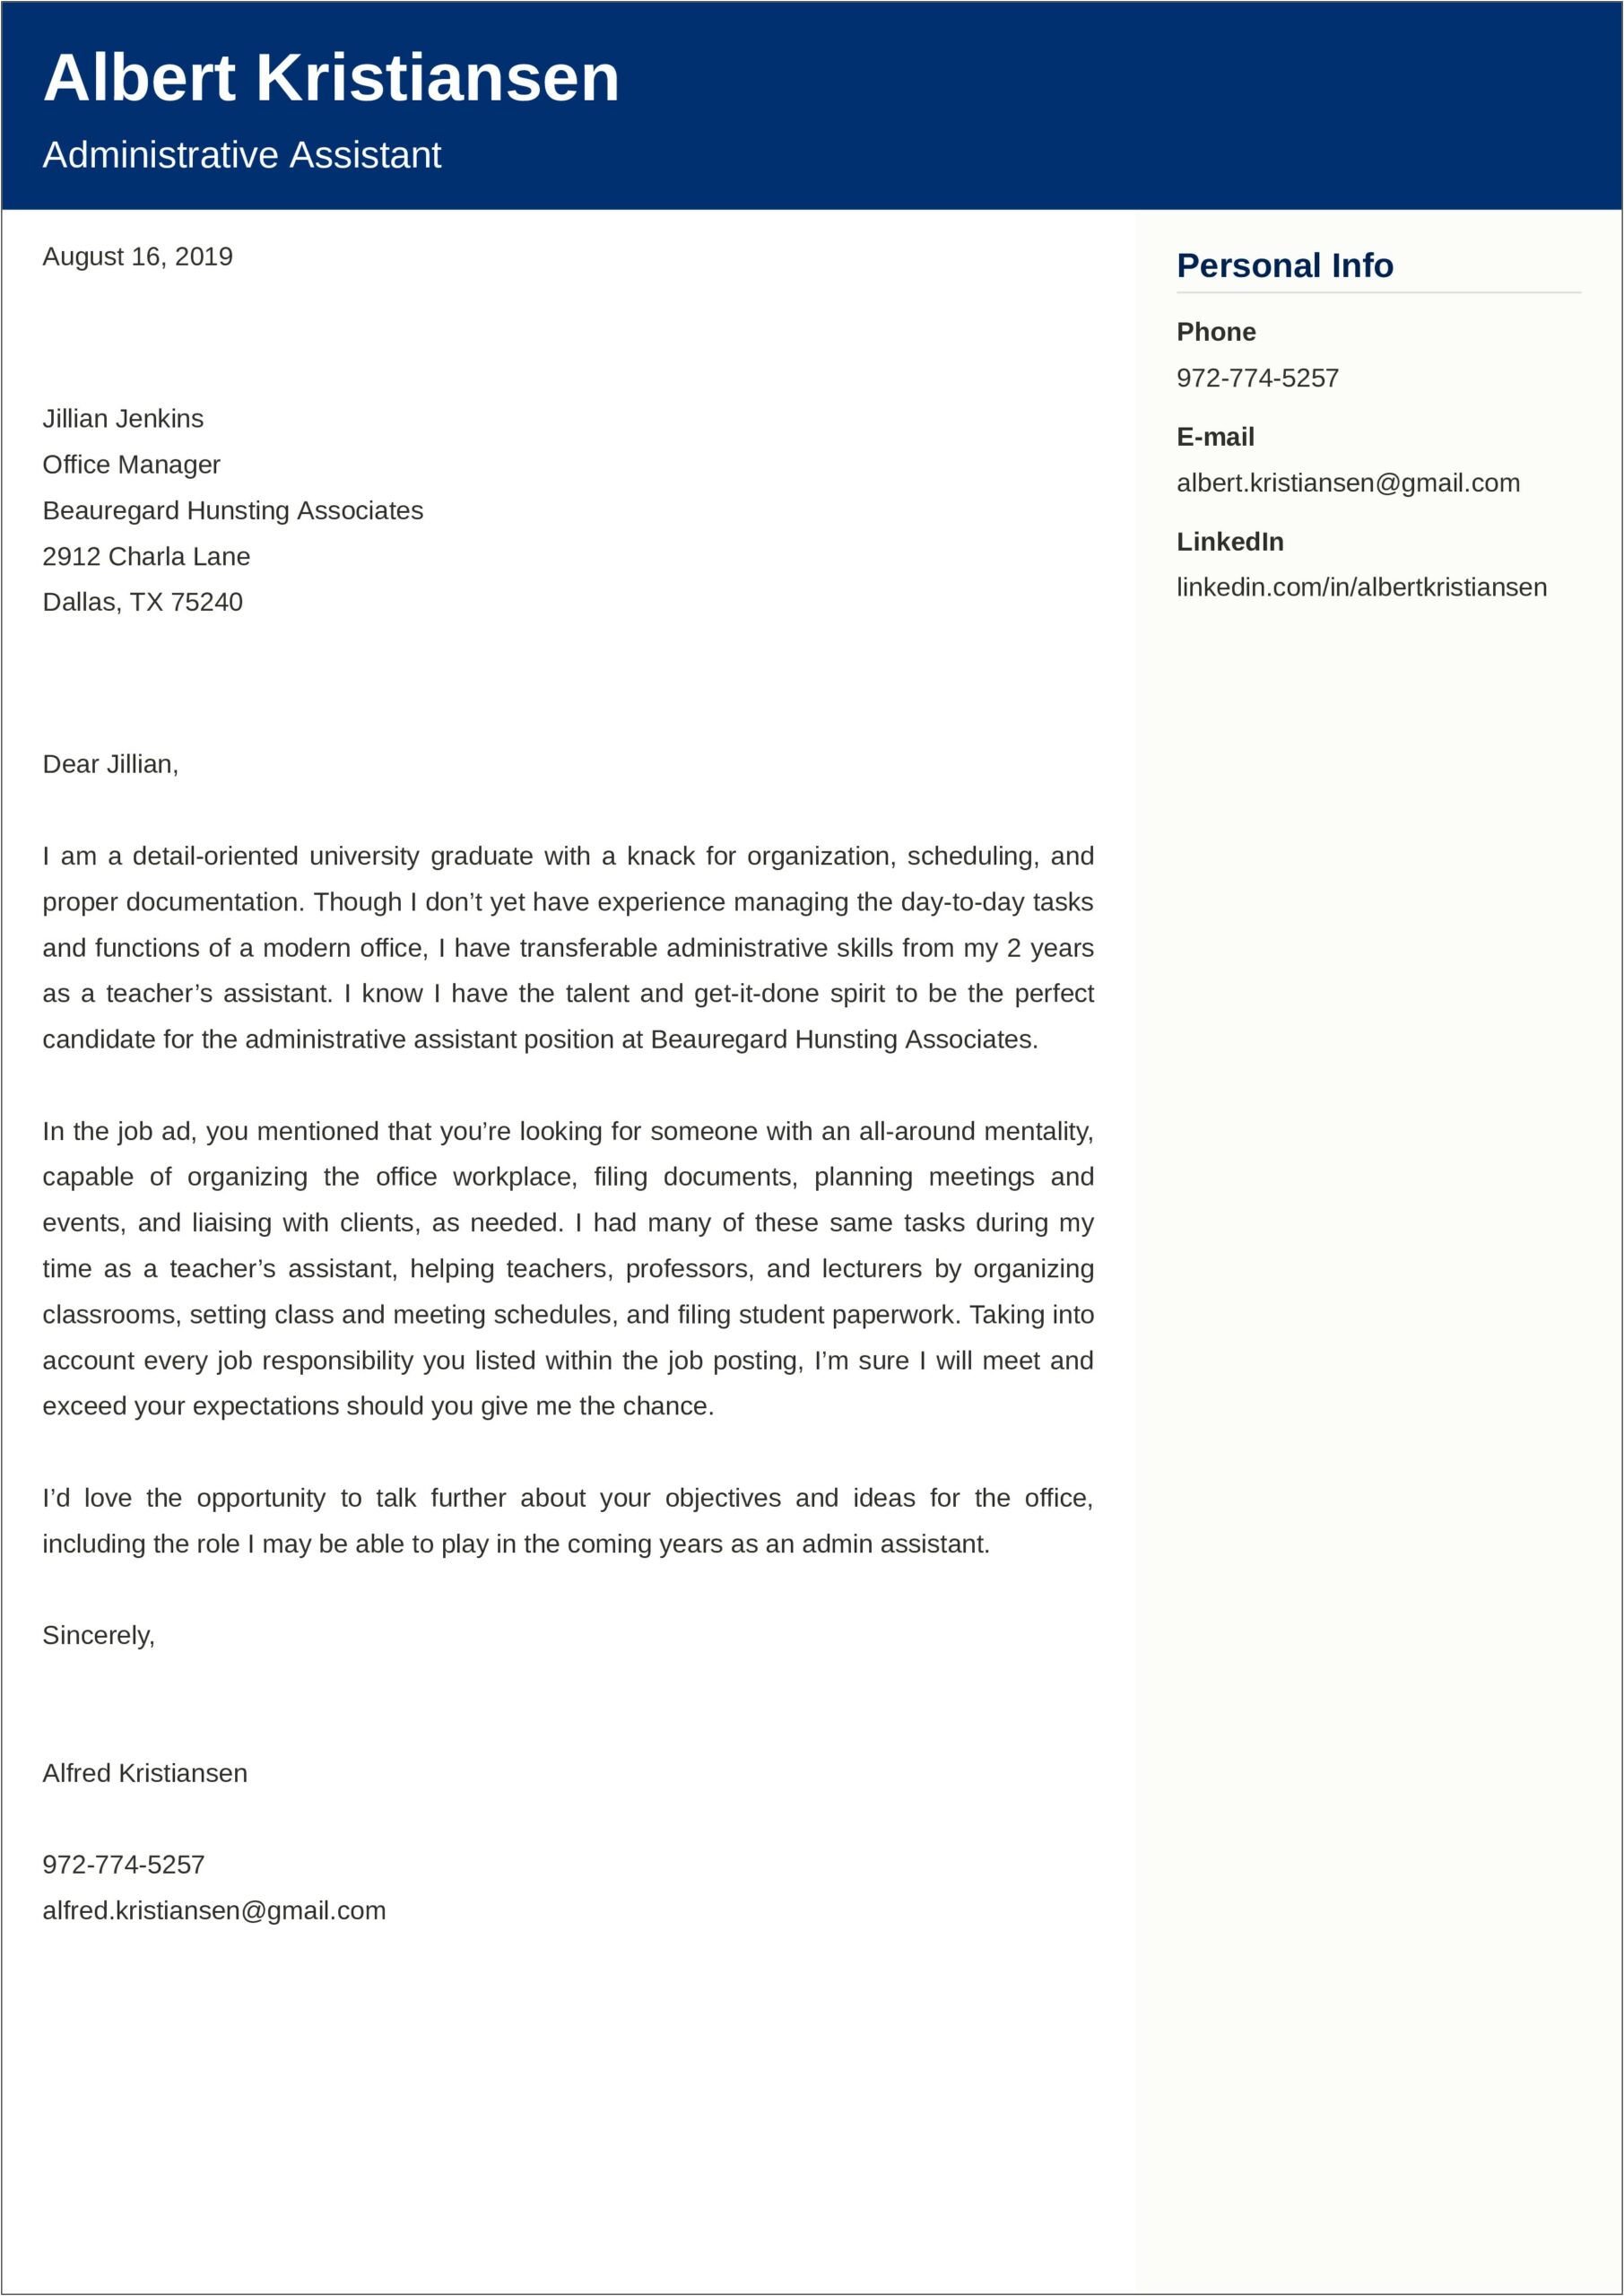 Resume Cover Letter Example For Administrative Assistant